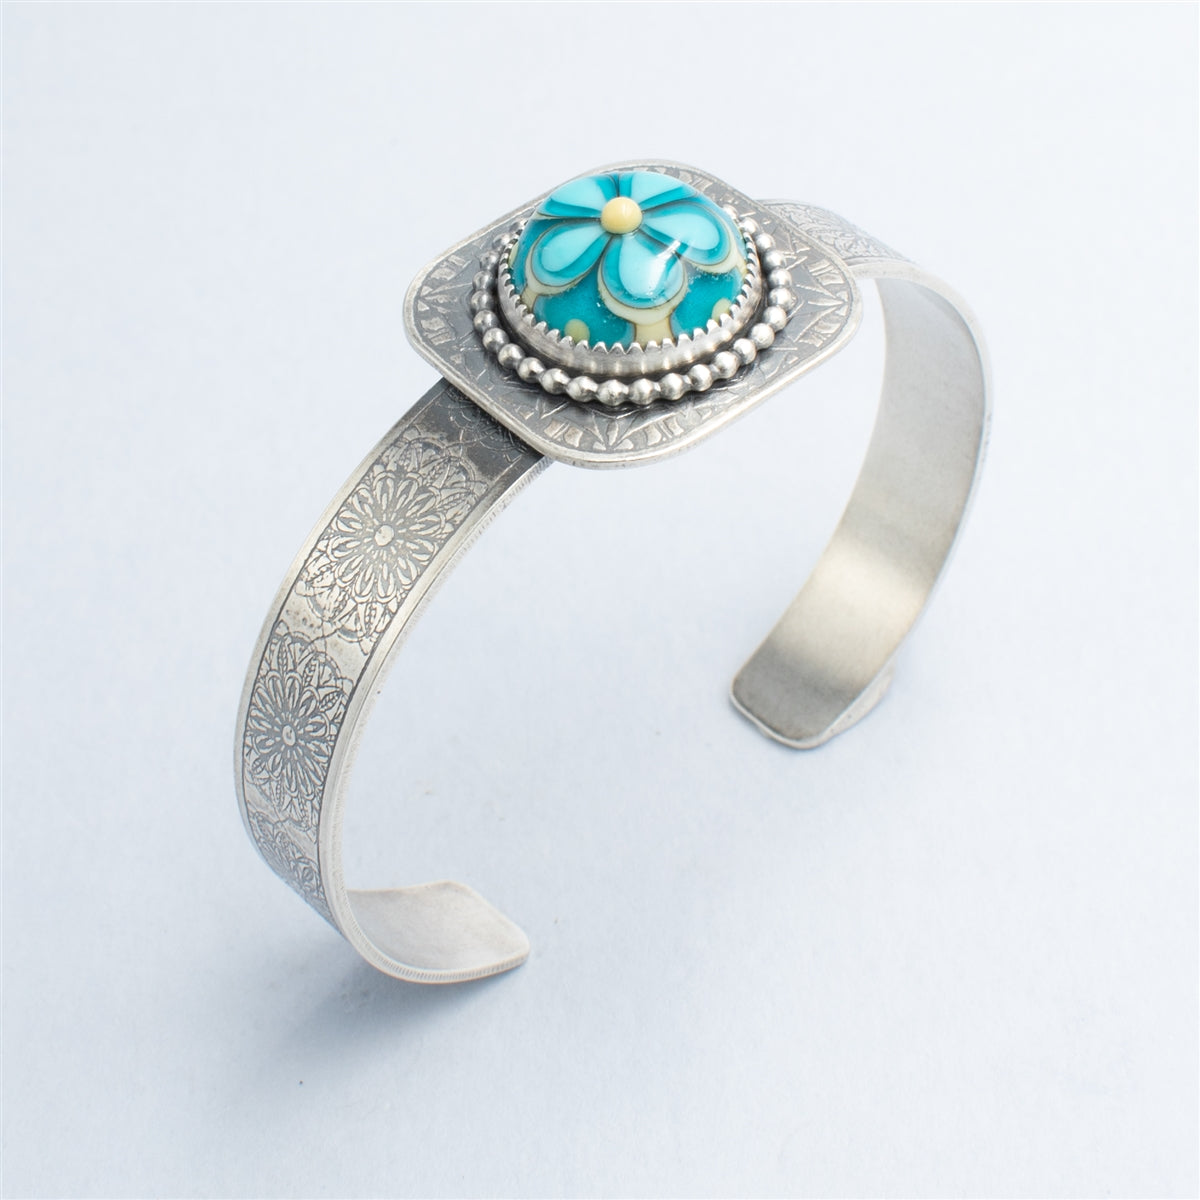 Turquoise and Sand sterling silver Cuff bracelet